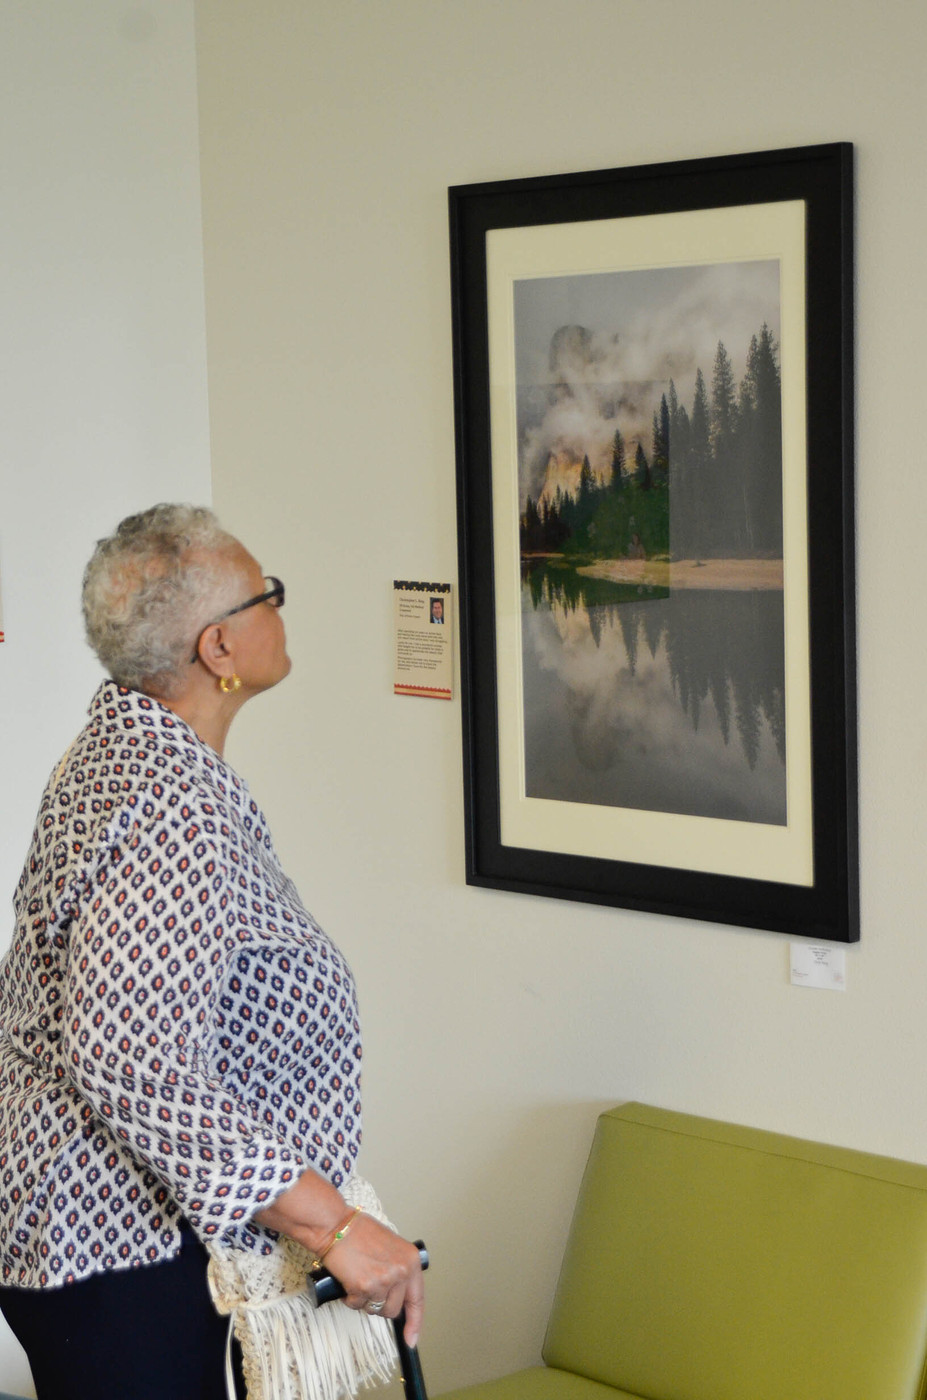 Pam Haynes, a Los Rios Board Trustee, is viewing a photo print titled "Clouded Reflections" by Chris Ring. This artwork is on display at the Veteran’s Art Show, on the third floor of the City College West Sacramento Center. April 9, 2016. Christopher Williams, Staff Photographer. |chrisWexpress@gmail.com